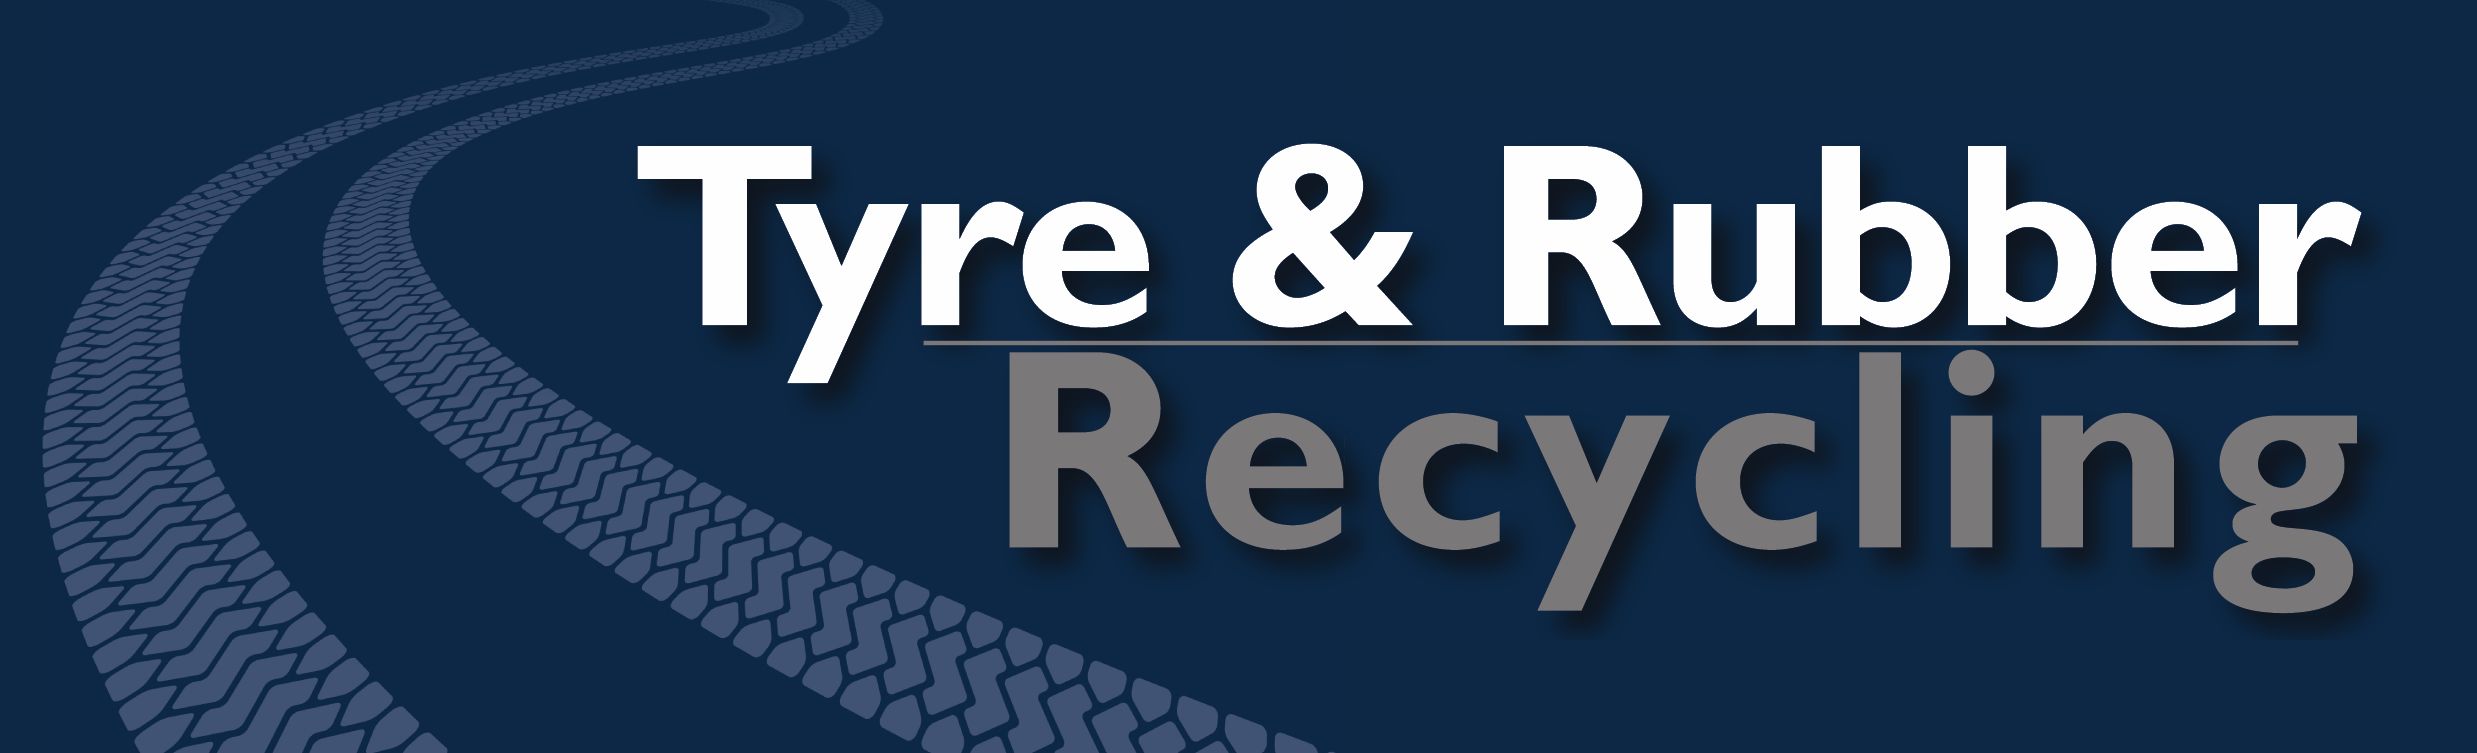 Tyre & Rubber Recycling